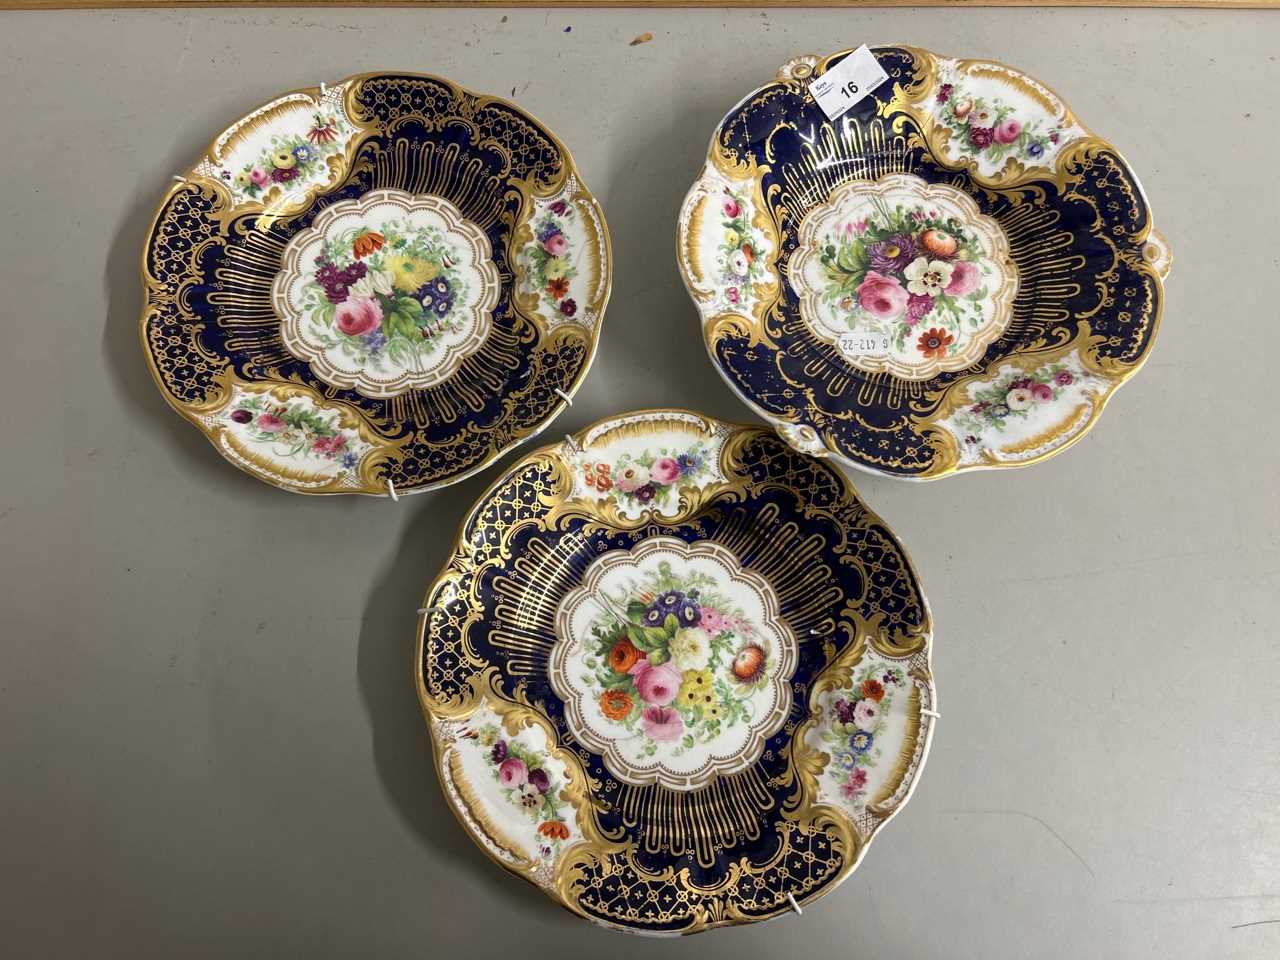 A pair of 19th Century gilt decorated cabinet plates and a further similar comport, all heavily